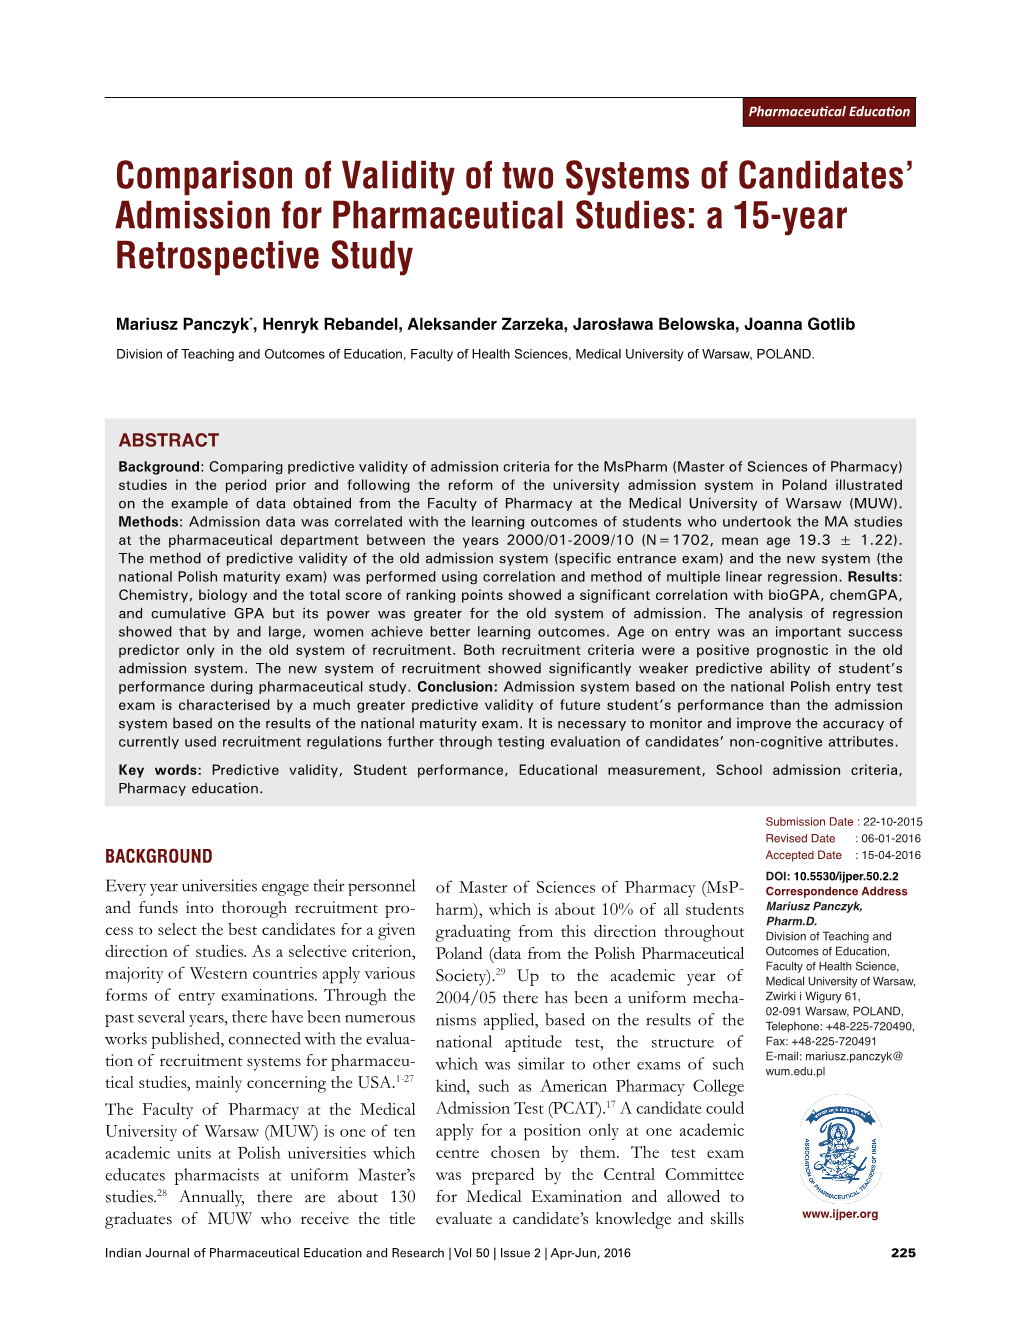 Comparison of Validity of Two Systems of Candidates' Admission For